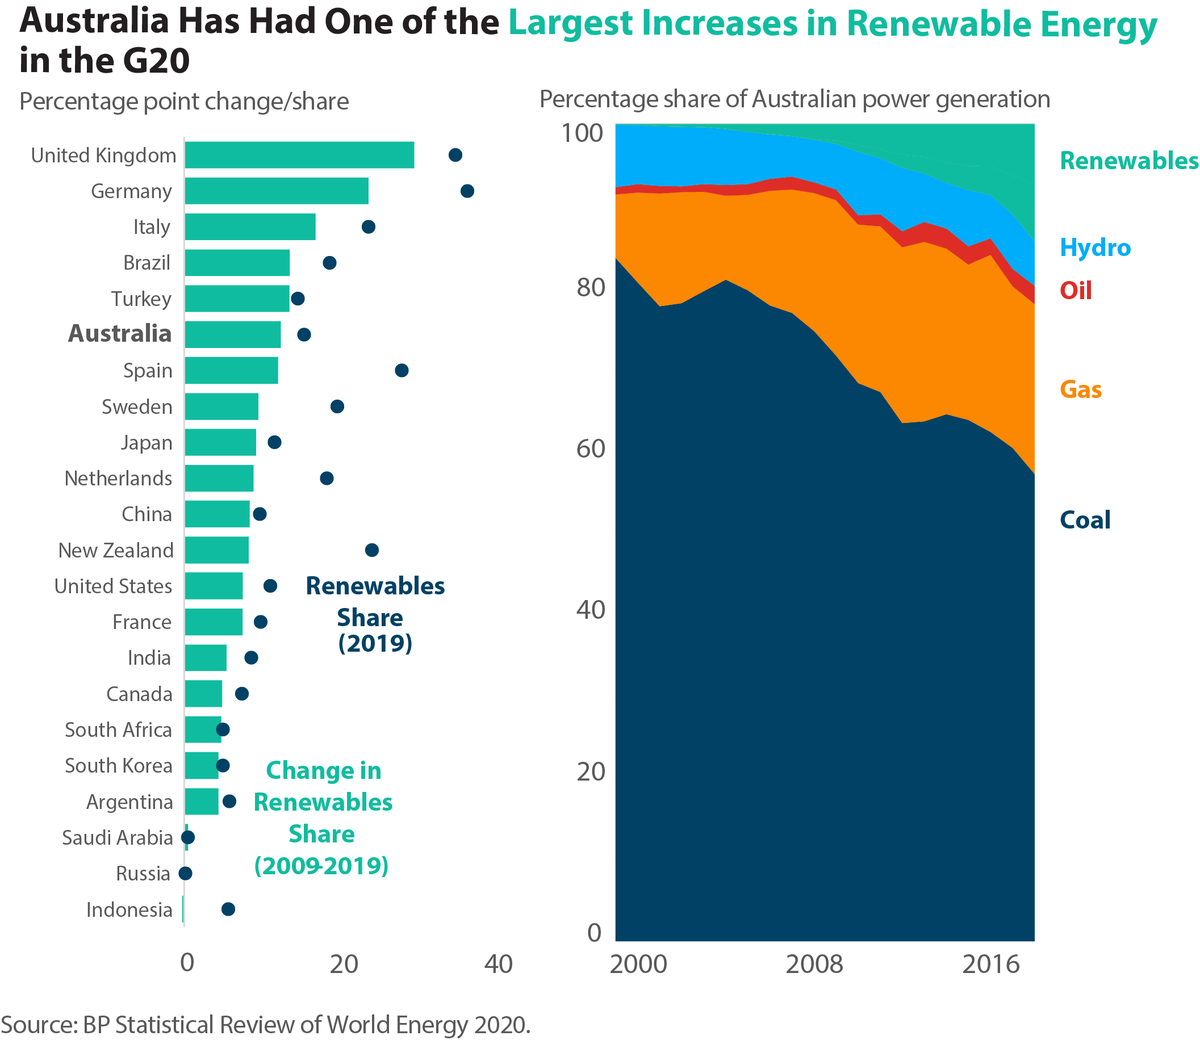 4/ Australia, like the US, is also experiencing a faster energy transition than you might expect.Among G20 countries, Aus had the 5th fastest growth in renewable electricity over the last 10 years, and the 3rd fastest fall in coal-fired power generation https://www.nytimes.com/2020/09/29/business/energy-environment/australia-rooftop-solar-coal.html